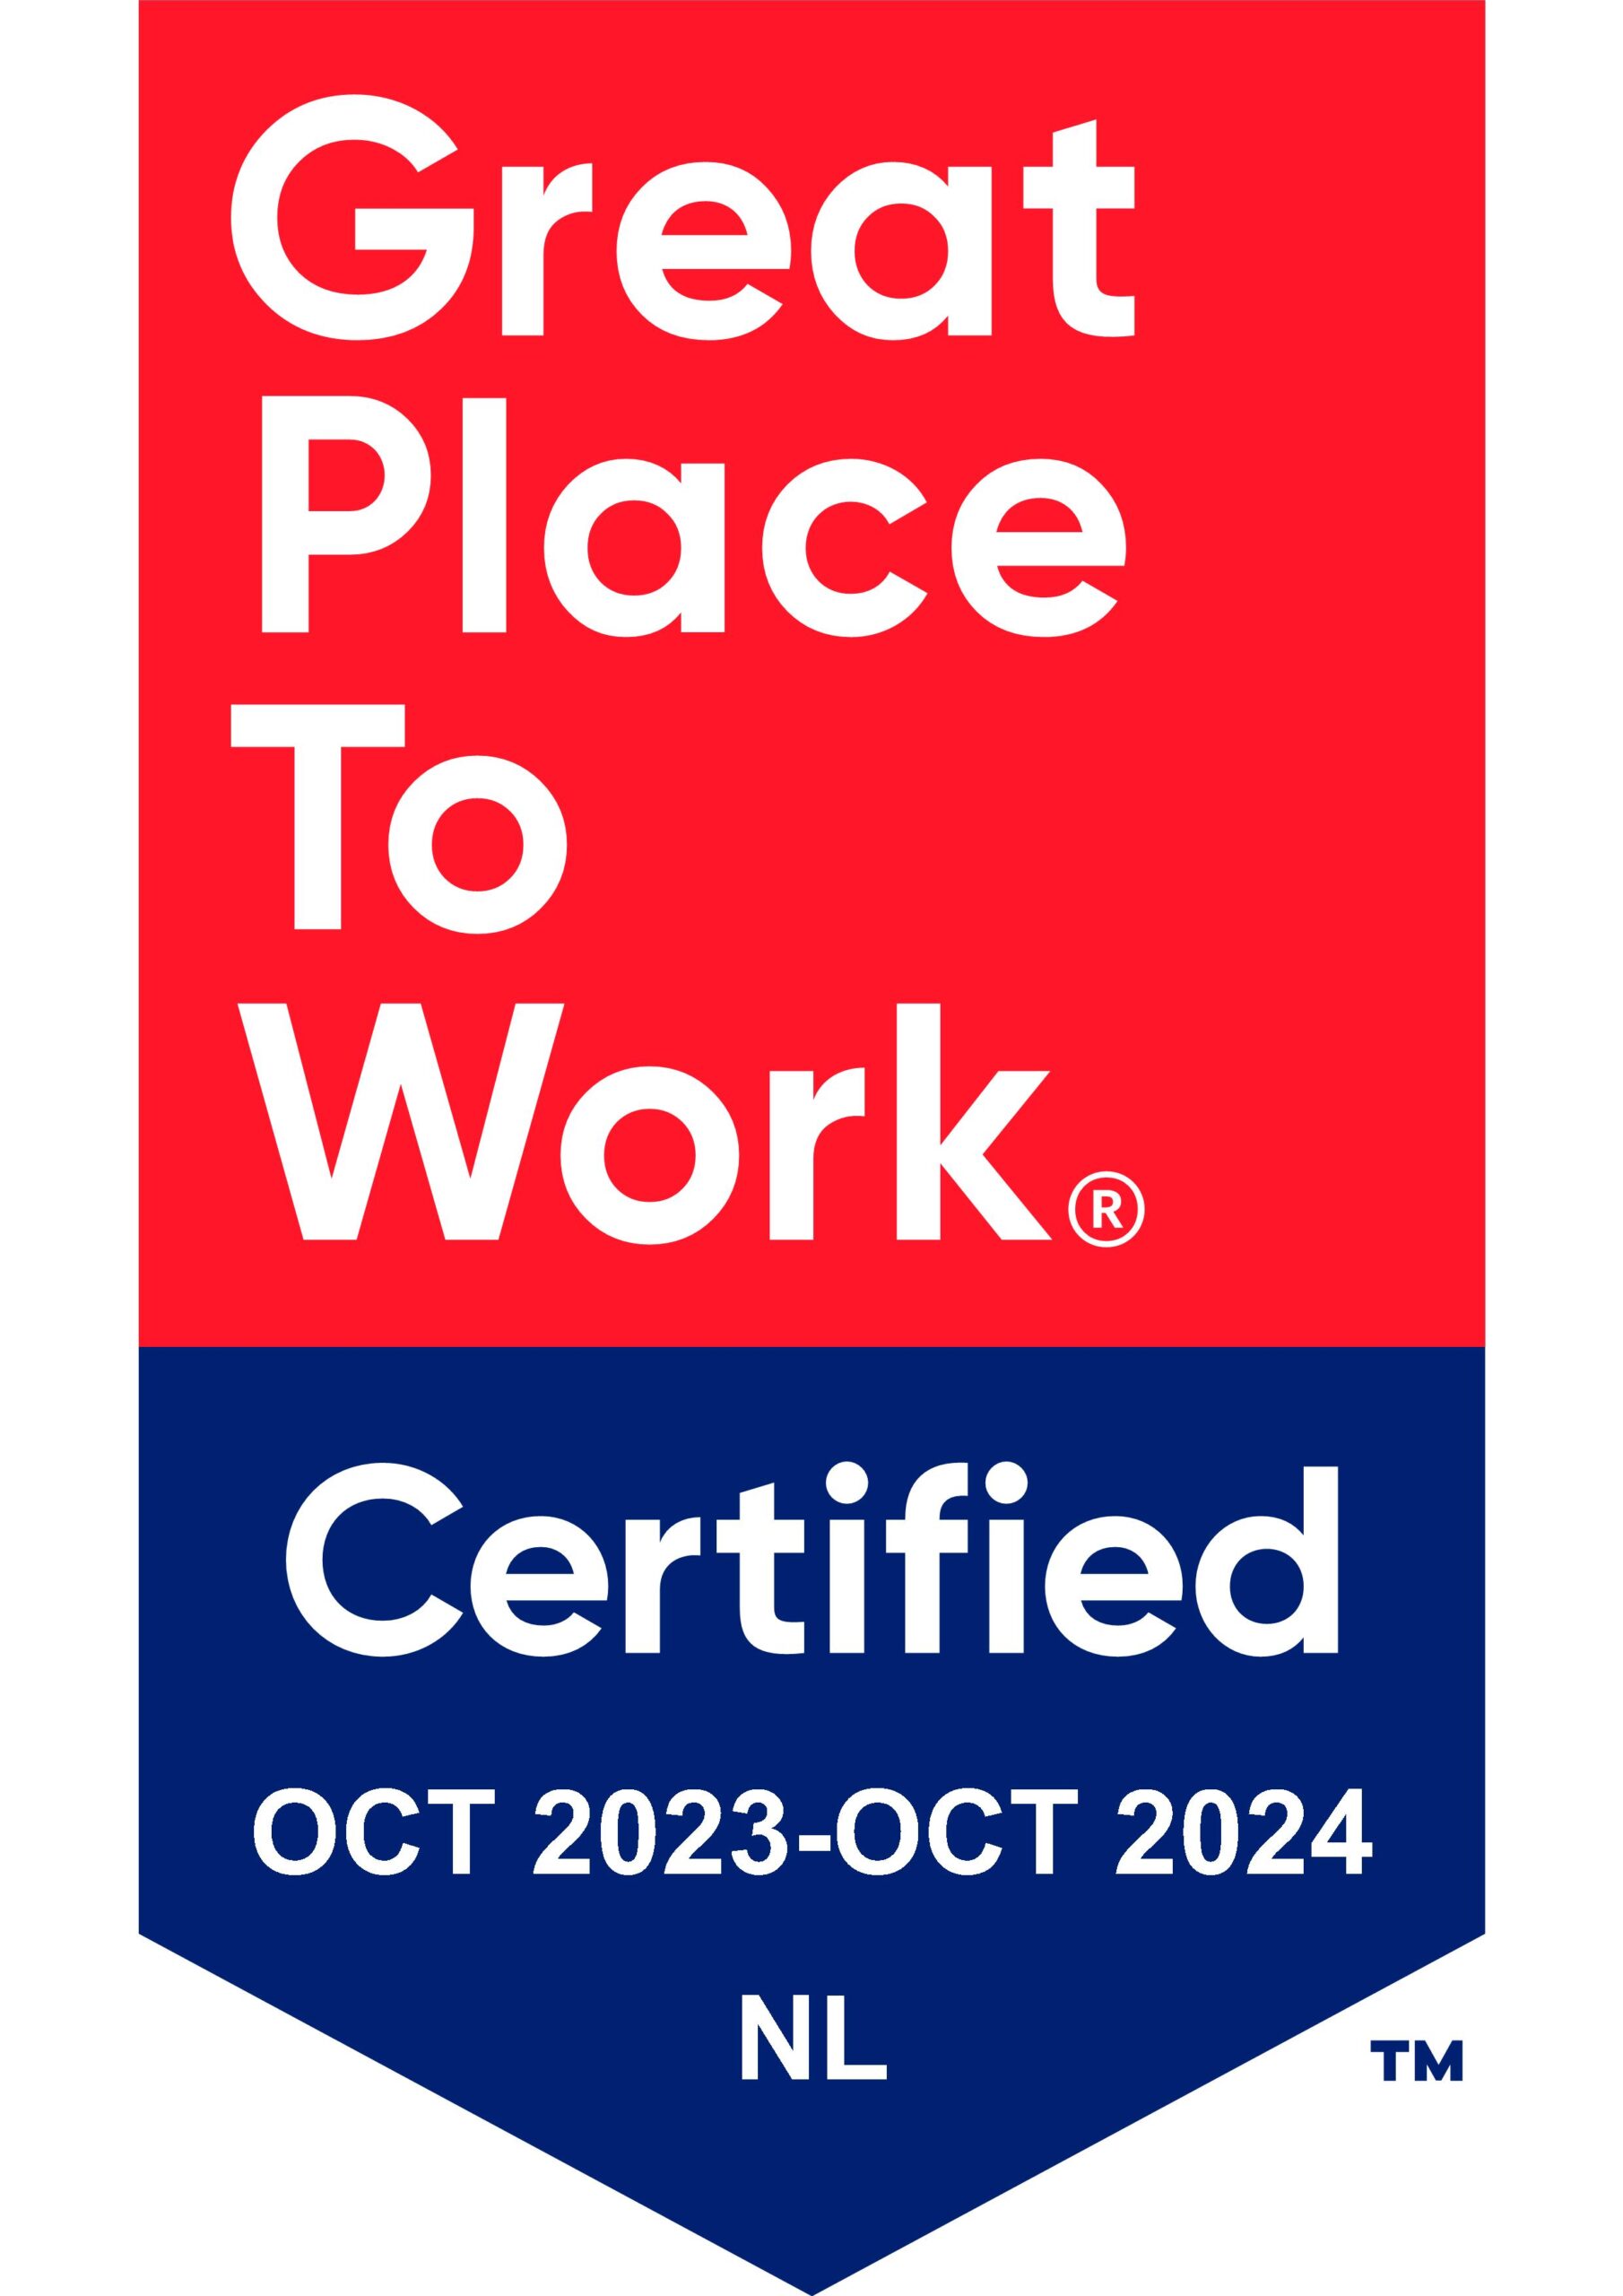 Great Place To Work Badge October 2023 to October 2024